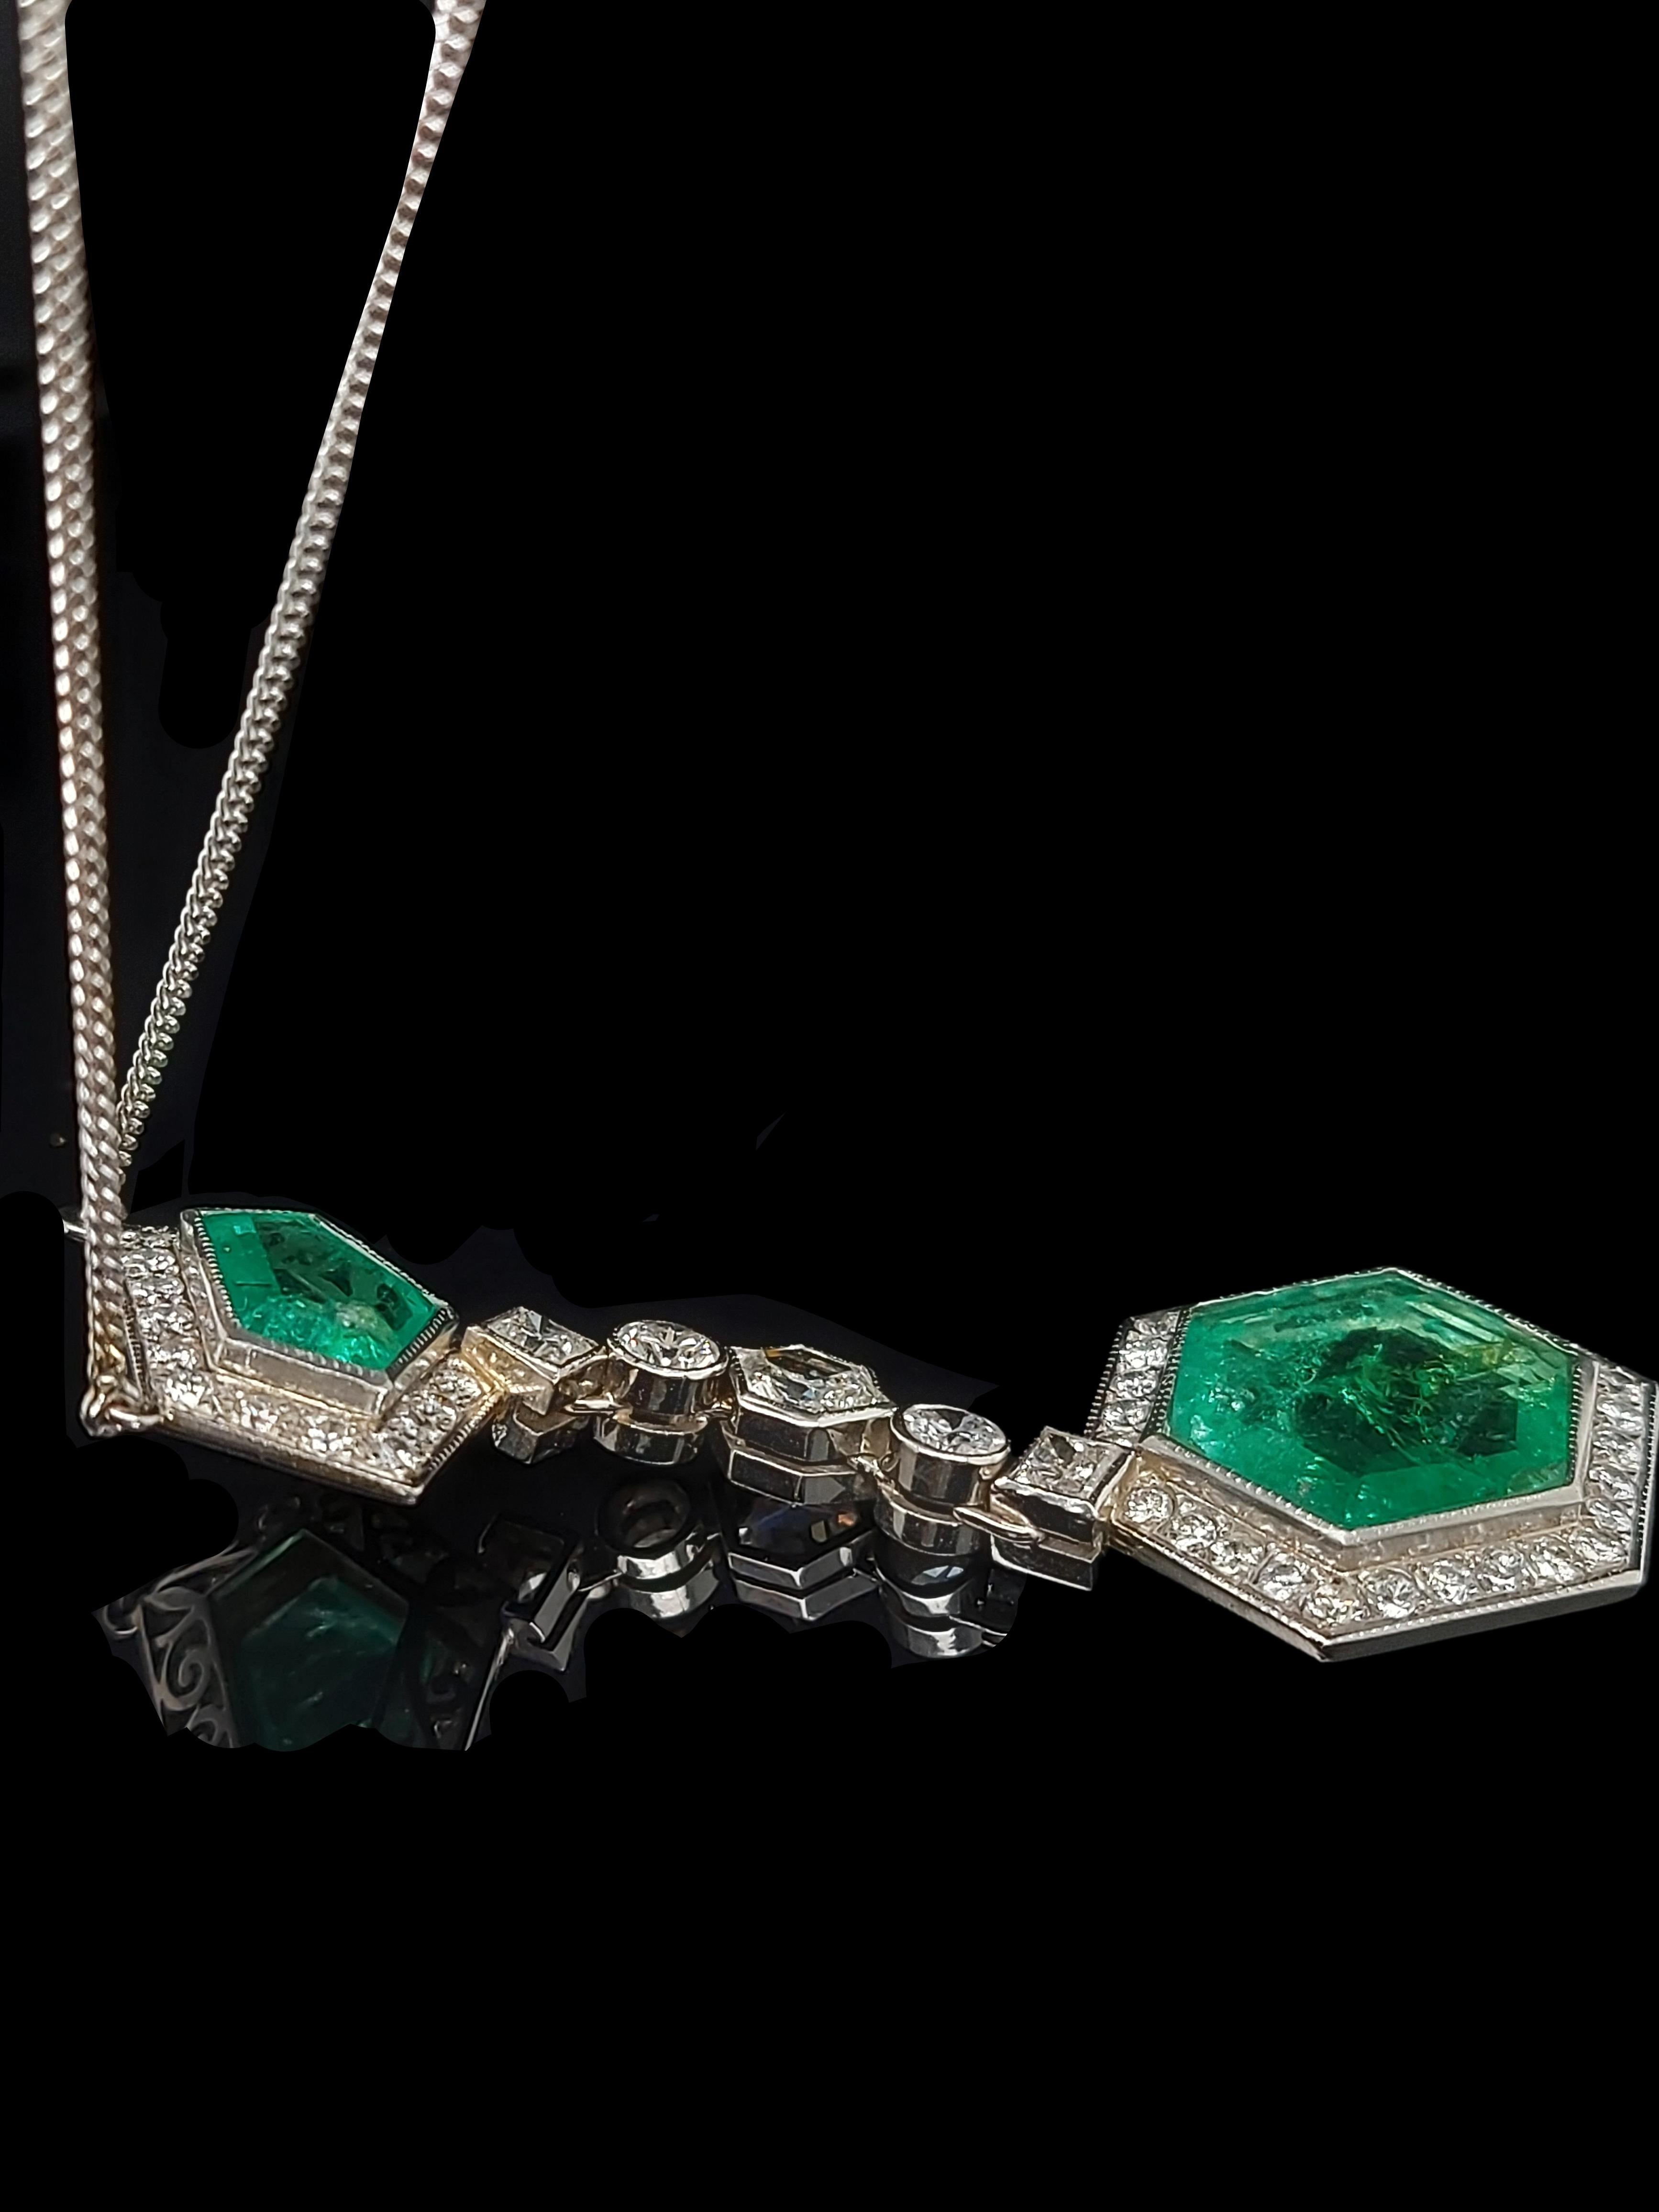 Necklace with 5.5 Carat Colombia Minor Emerald and Diamonds, CGL Certificate For Sale 2